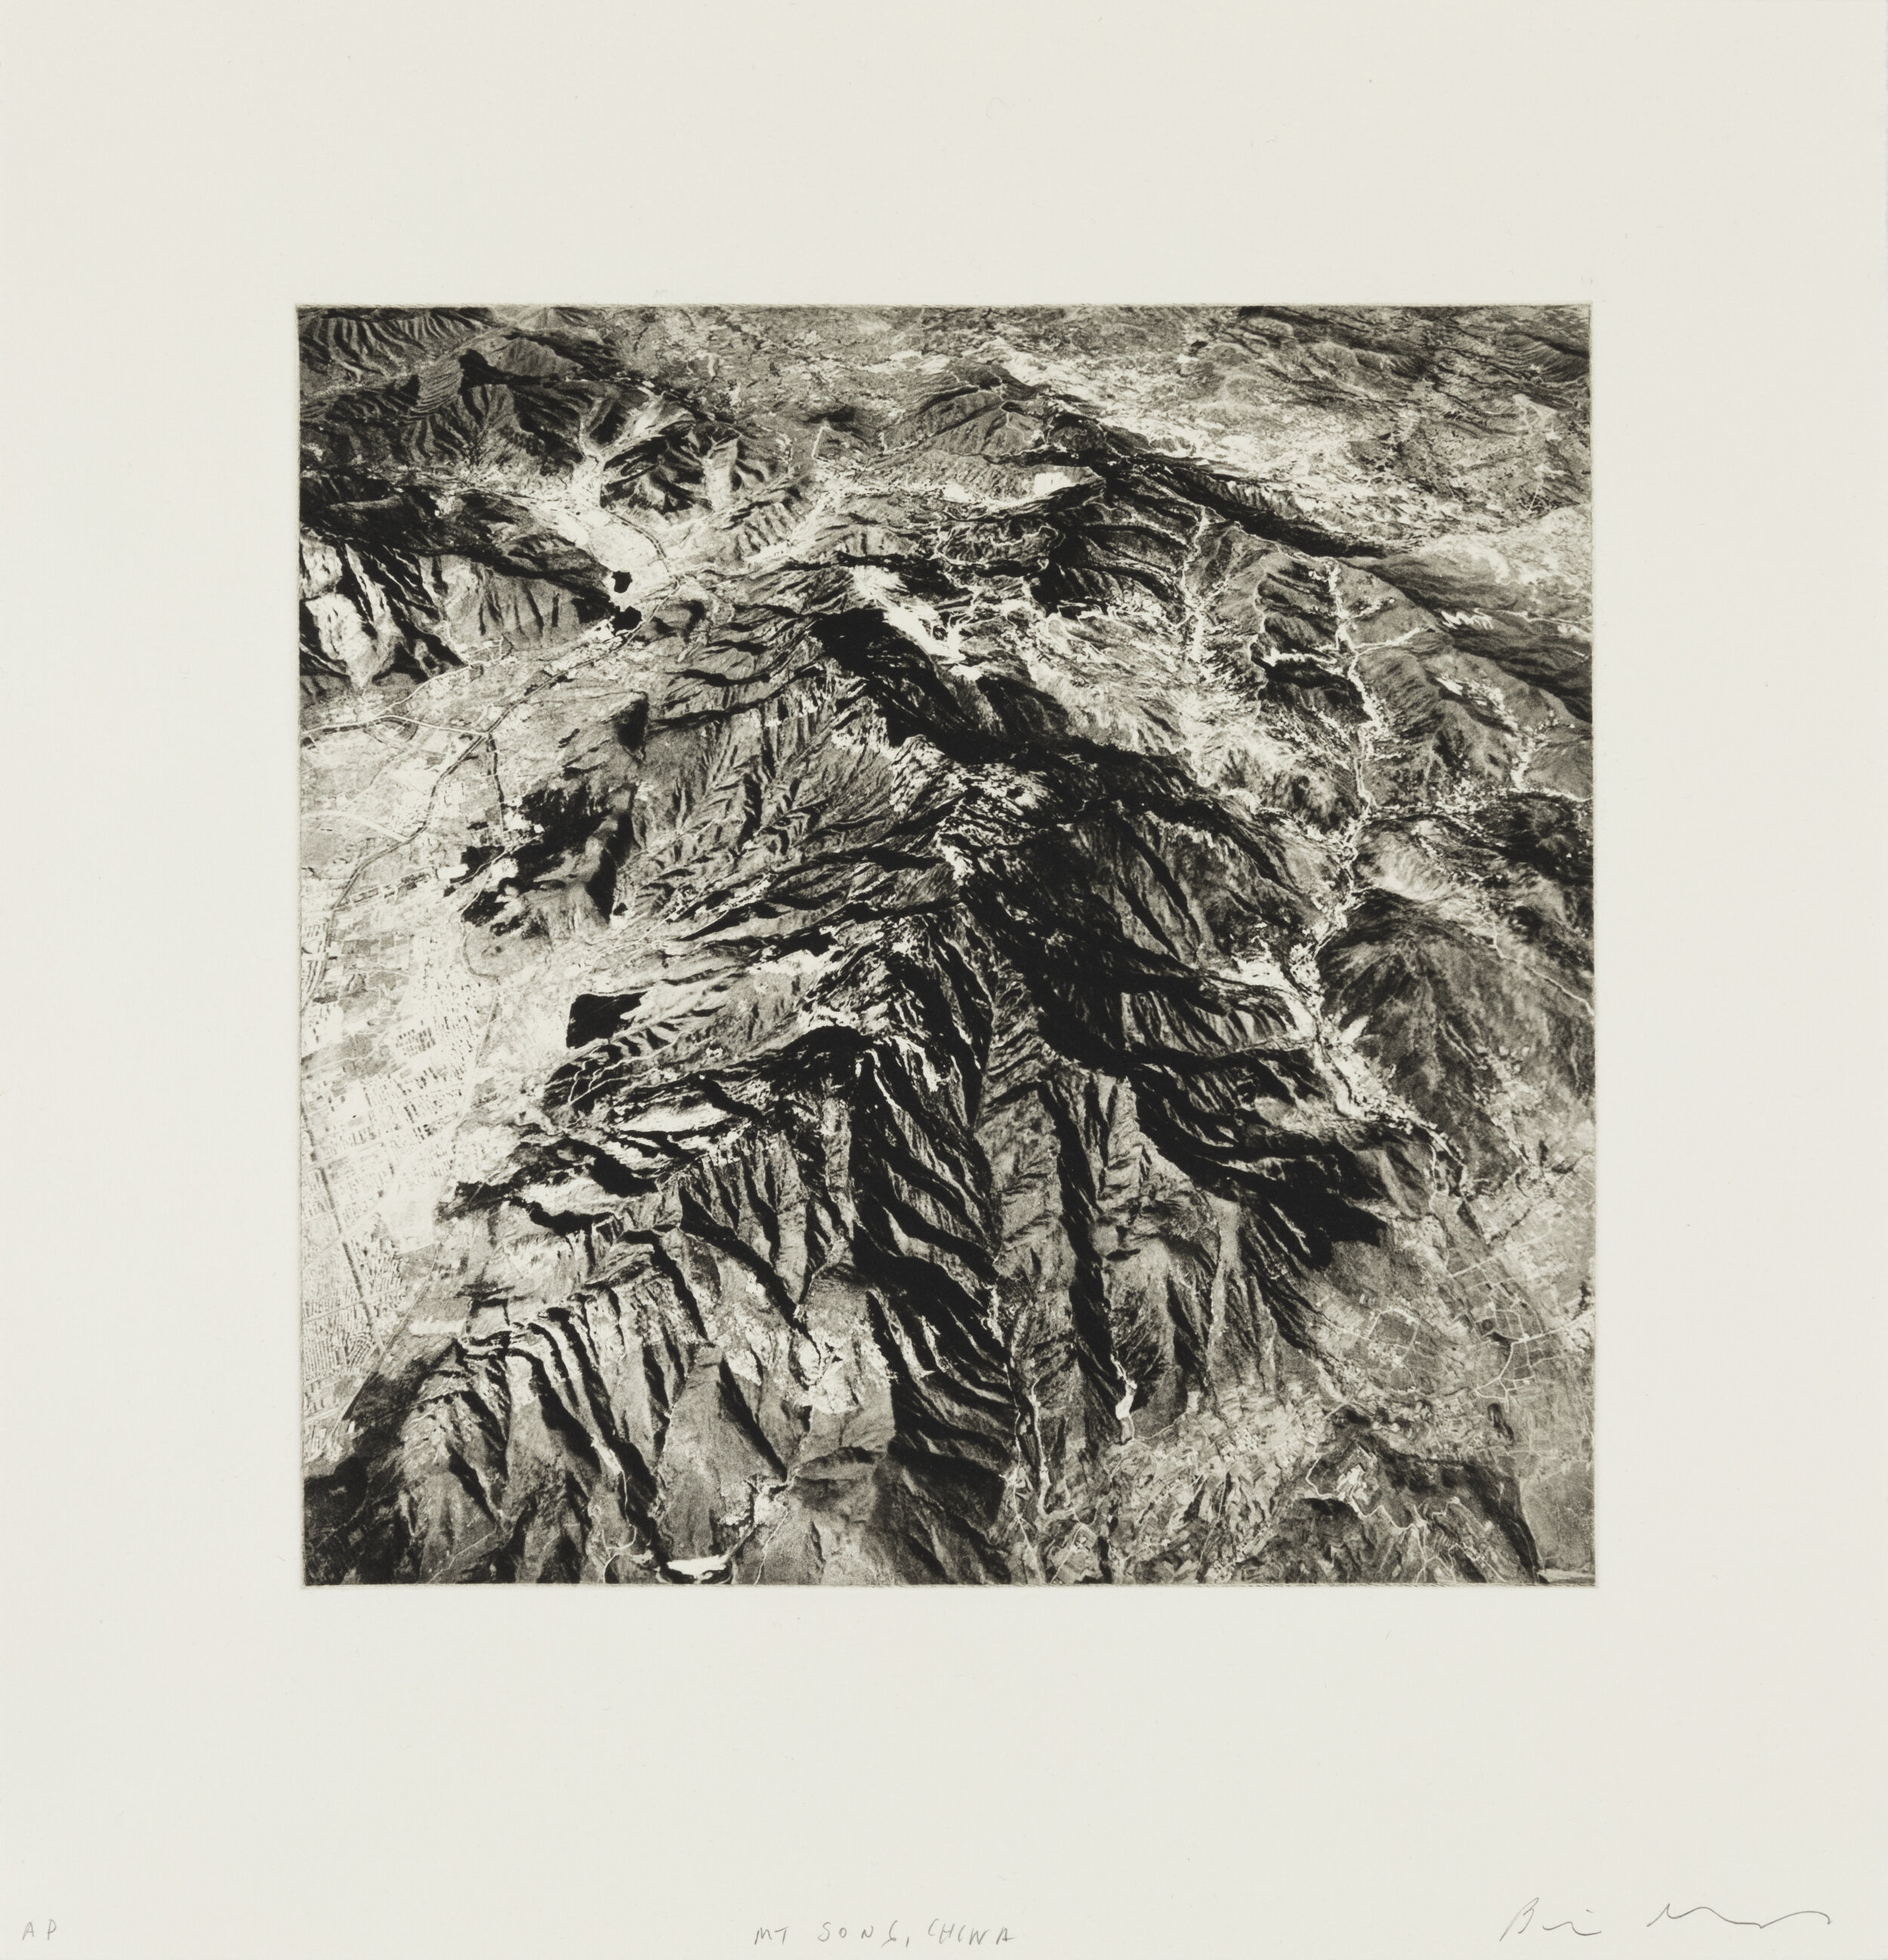    Mount Song, China, 2020   Copperplate photogravure etching on cotton rag paper, plate size; 10.6” x 10.6”, paper size; 16” x 15.5”, edition 10  